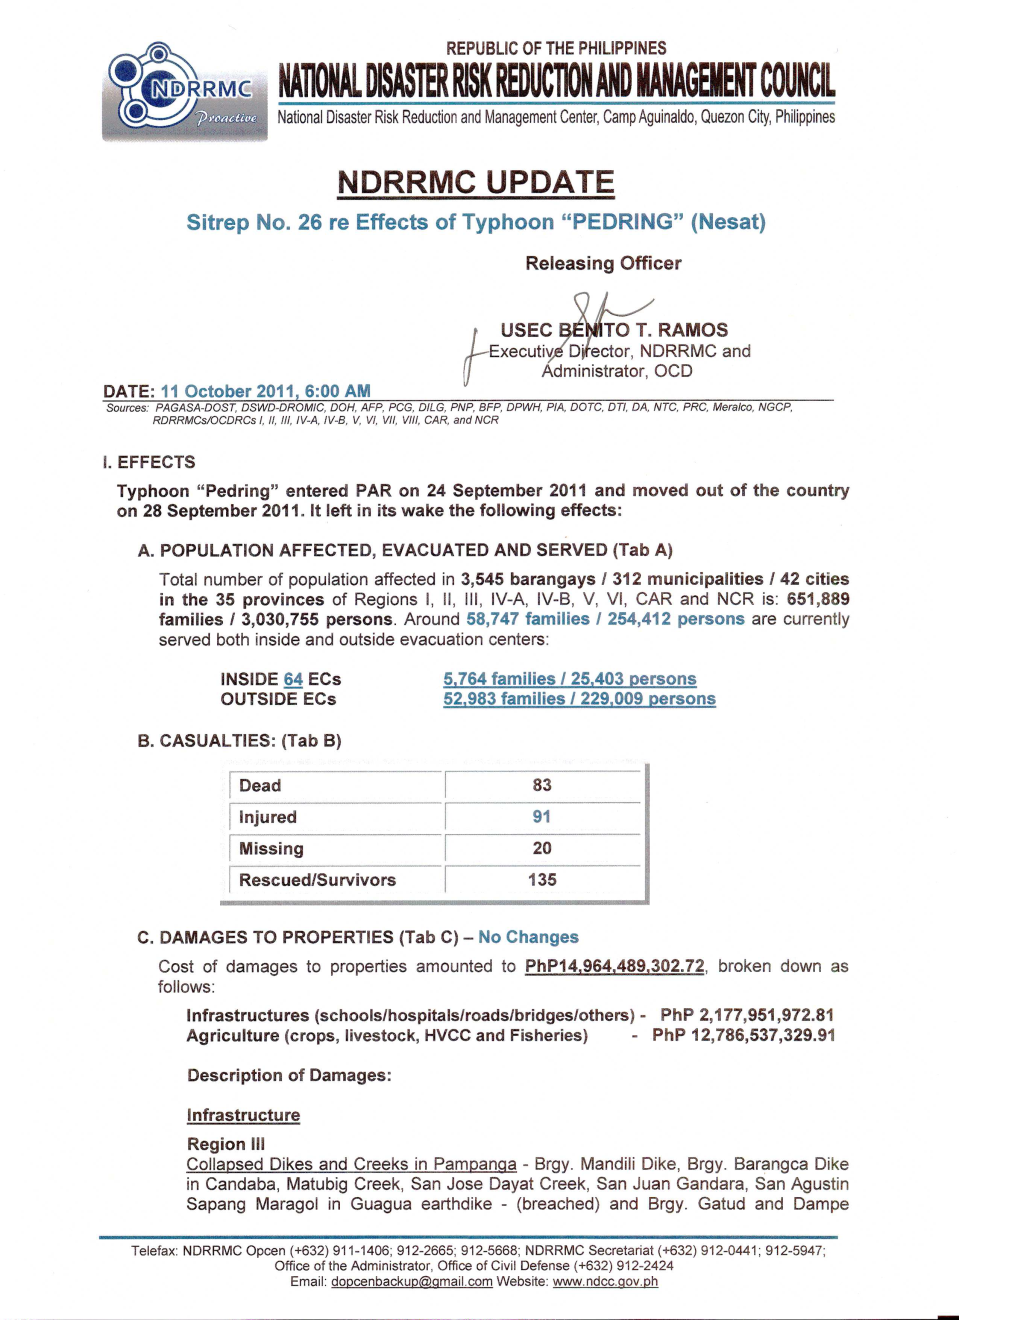 NDRRMC Update Sitrep No.26 Re Effects of Typhoon PEDRING